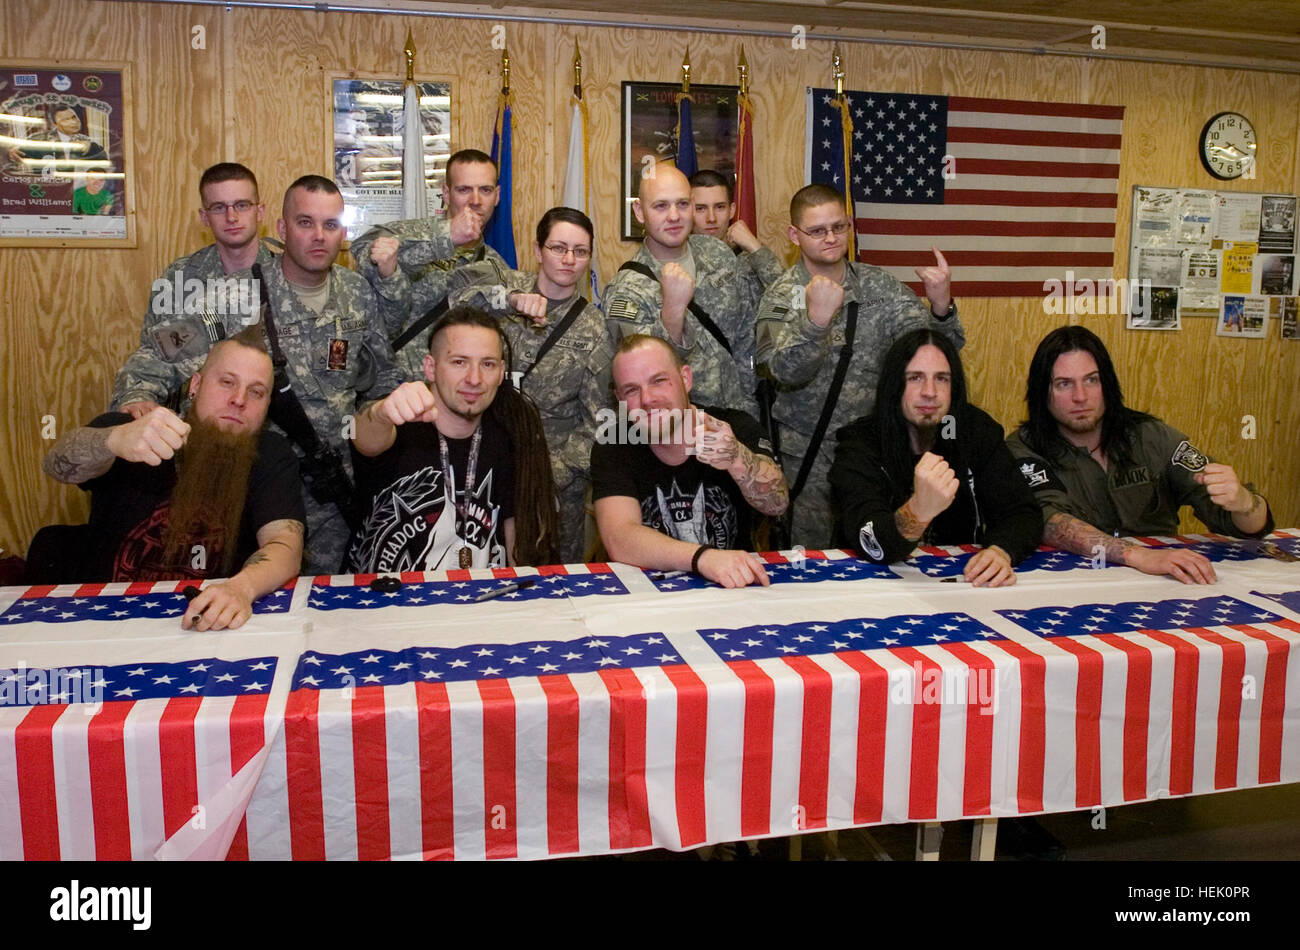 Metal band Five Finger Death Punch performs for U.S. troops at Camp  Stryker, Baghdad, March 3. The band came to Iraq to play a series of shows  for Department of Defense civilians